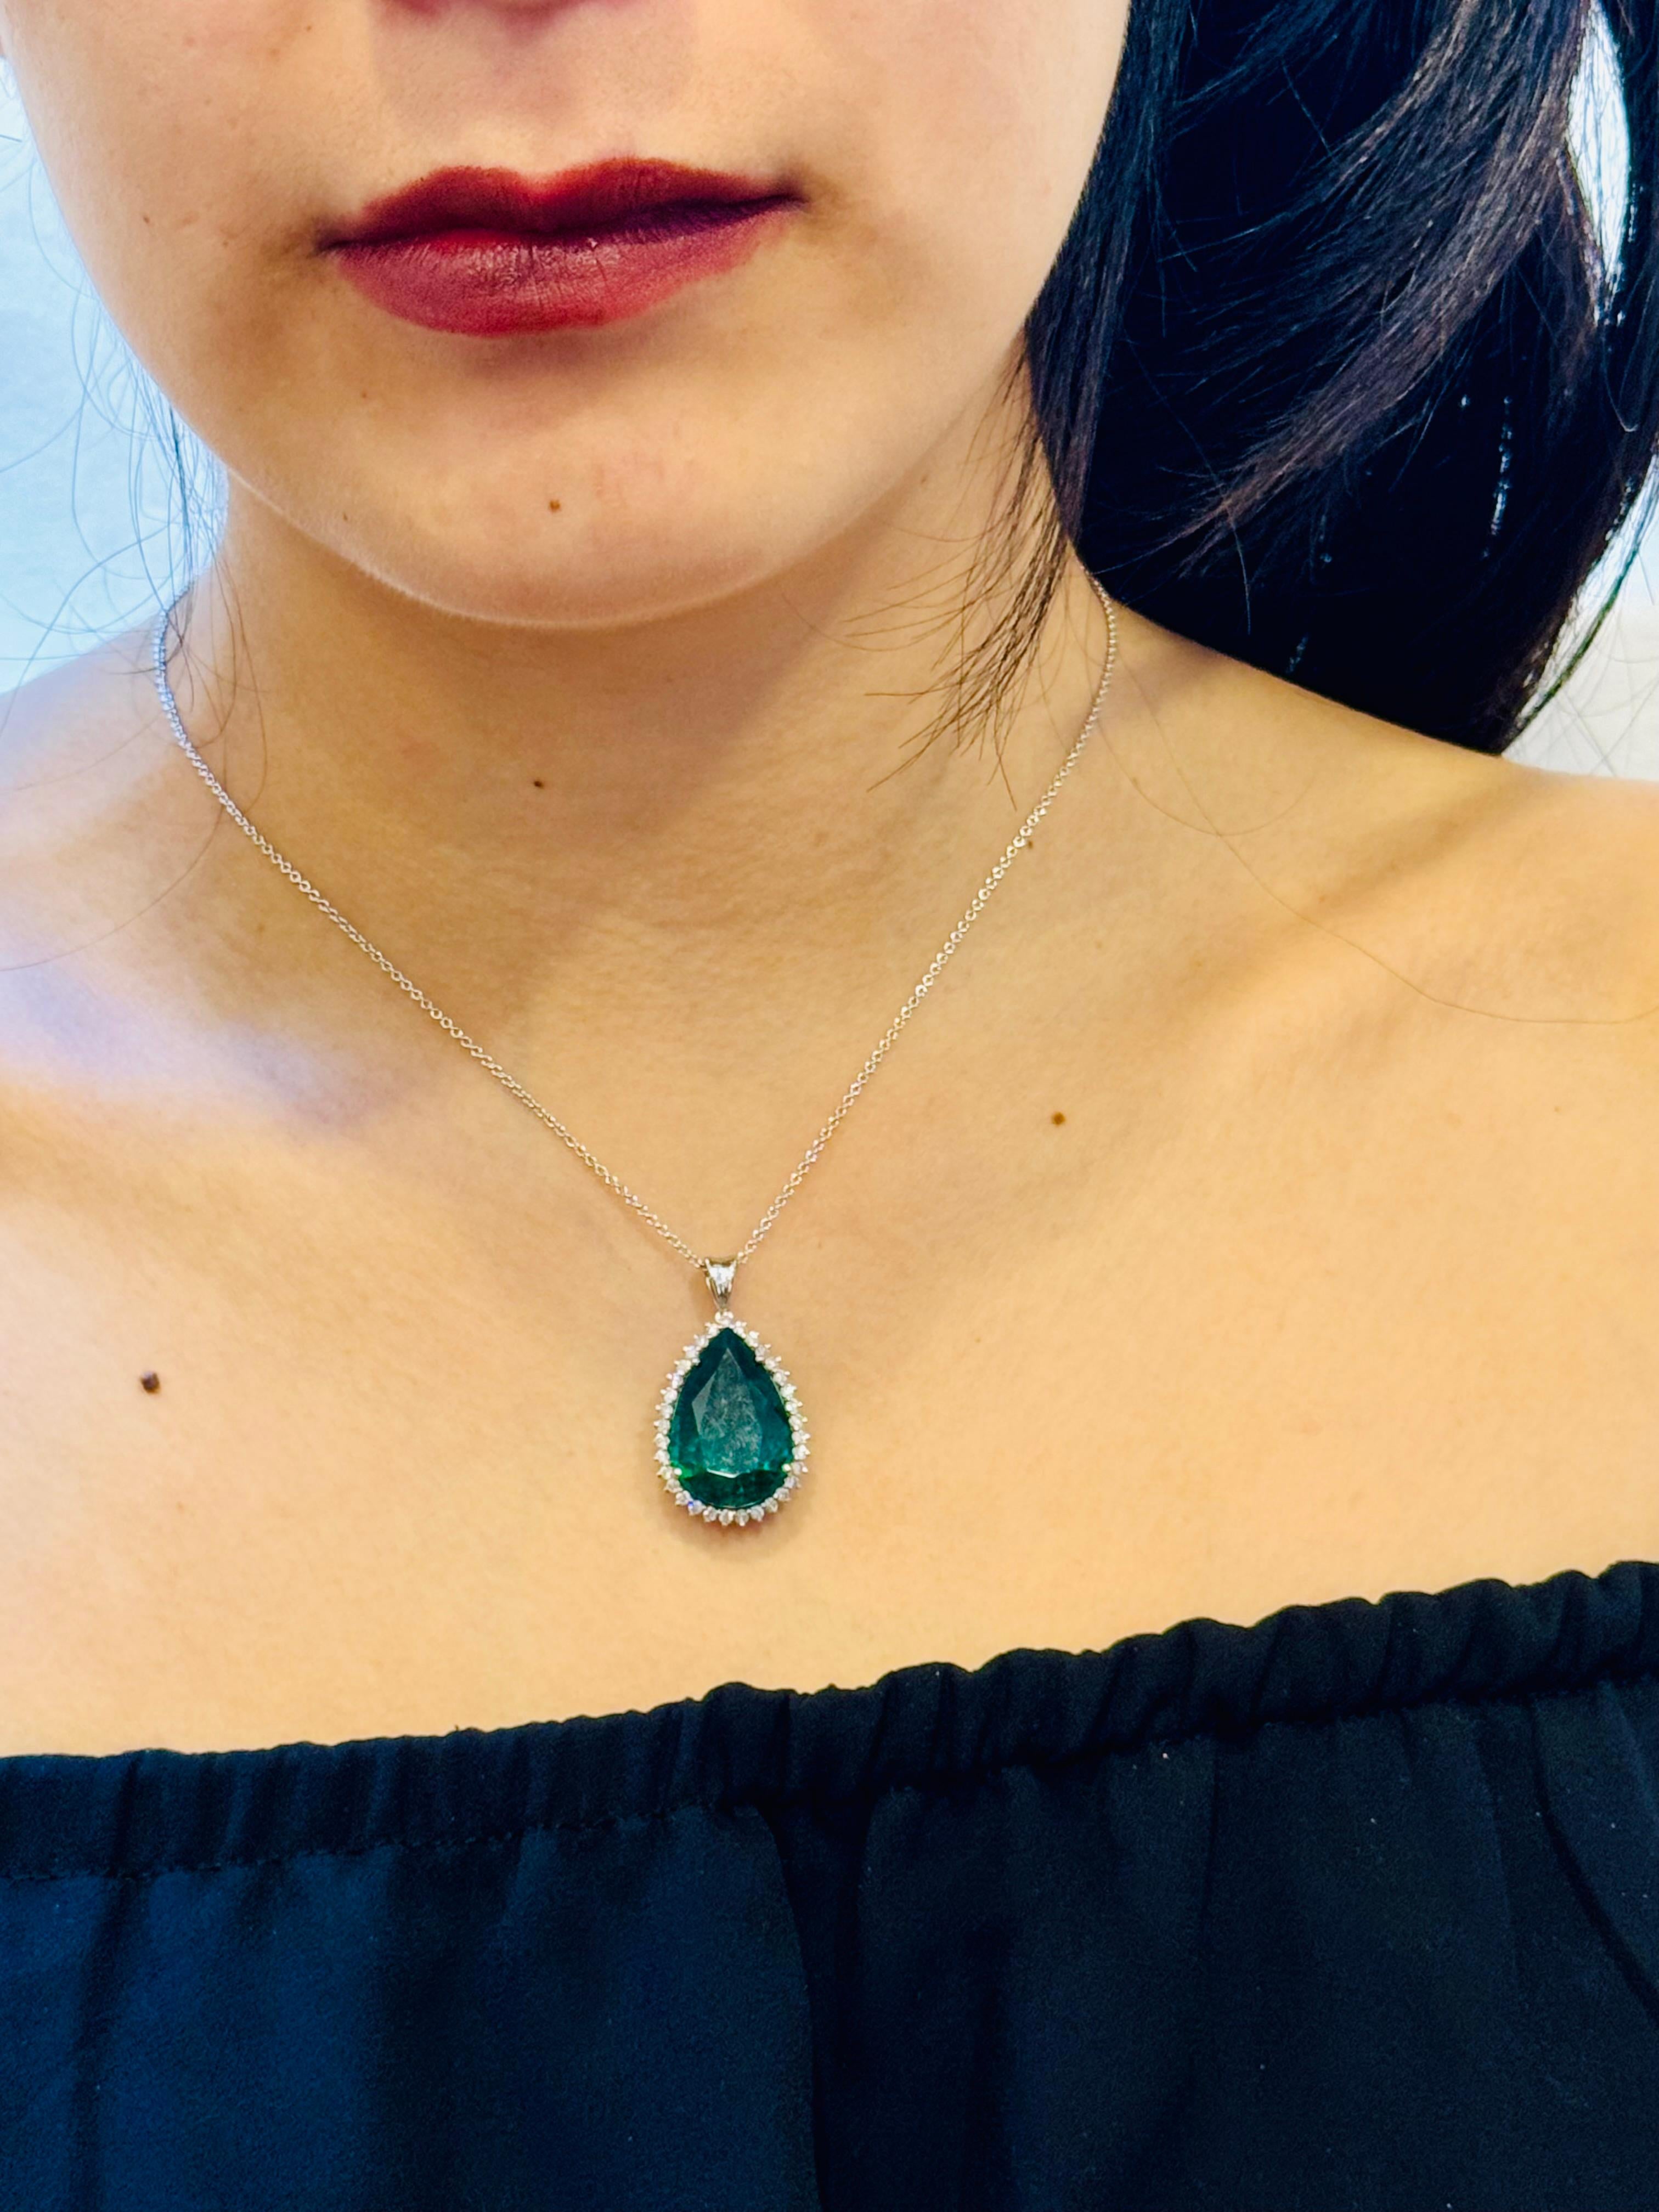 13 Ct Pear Cut Emerald & 1 Ct Diamond Halo Pendent/Necklace 14 KW Gold Chain 9